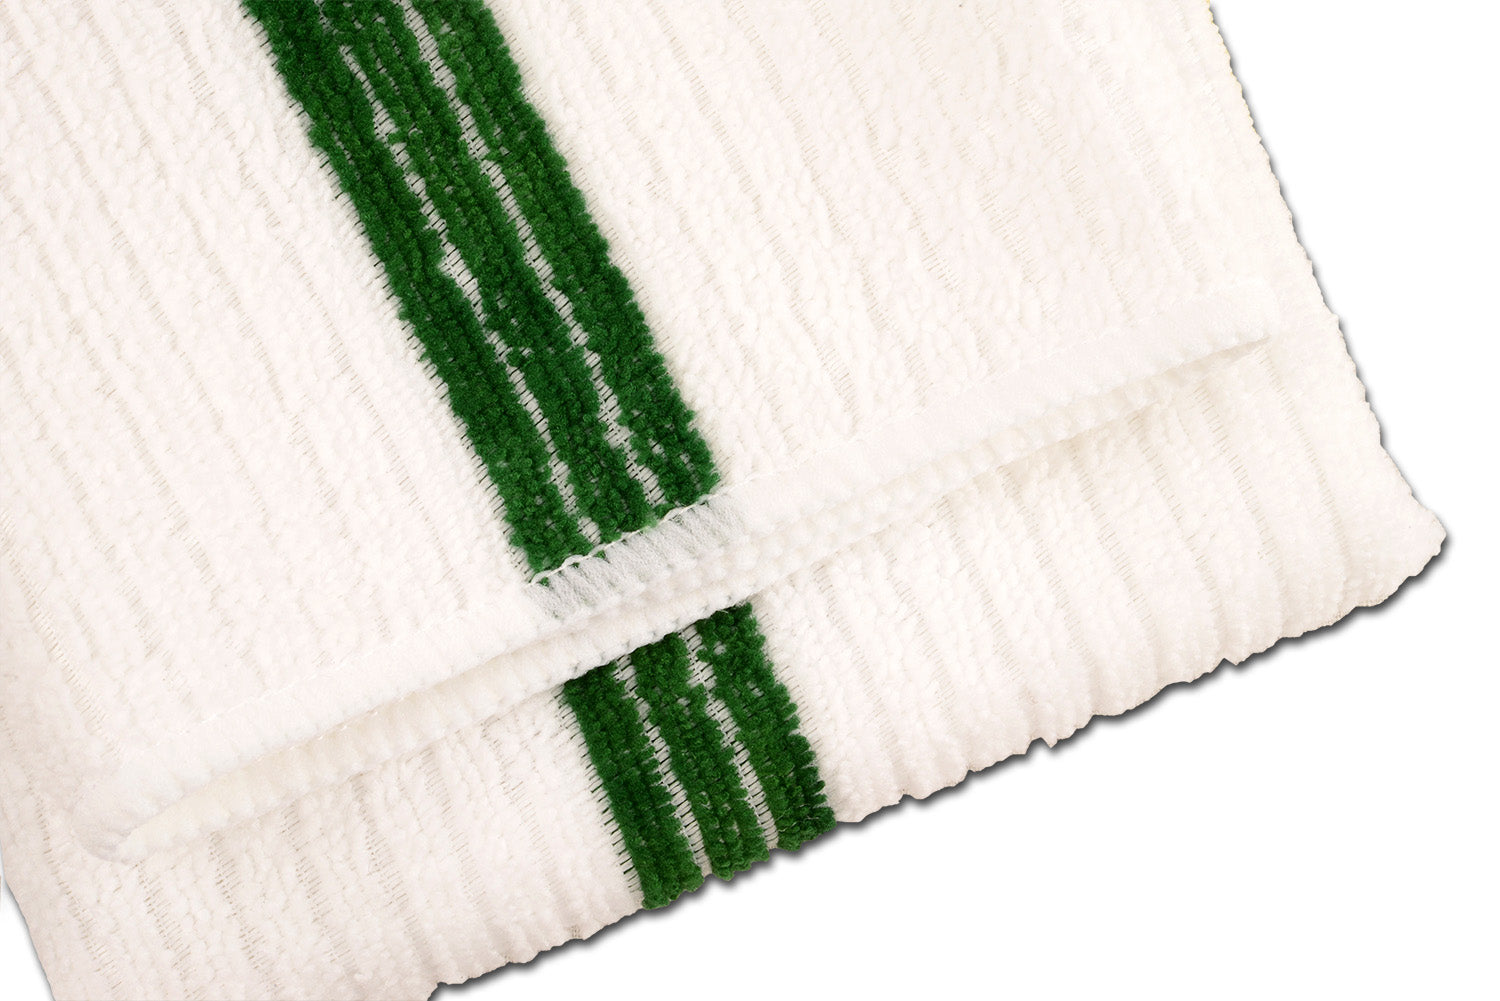 Bar Mops & Kitchen Towels [Buy in bulk at wholesale prices]